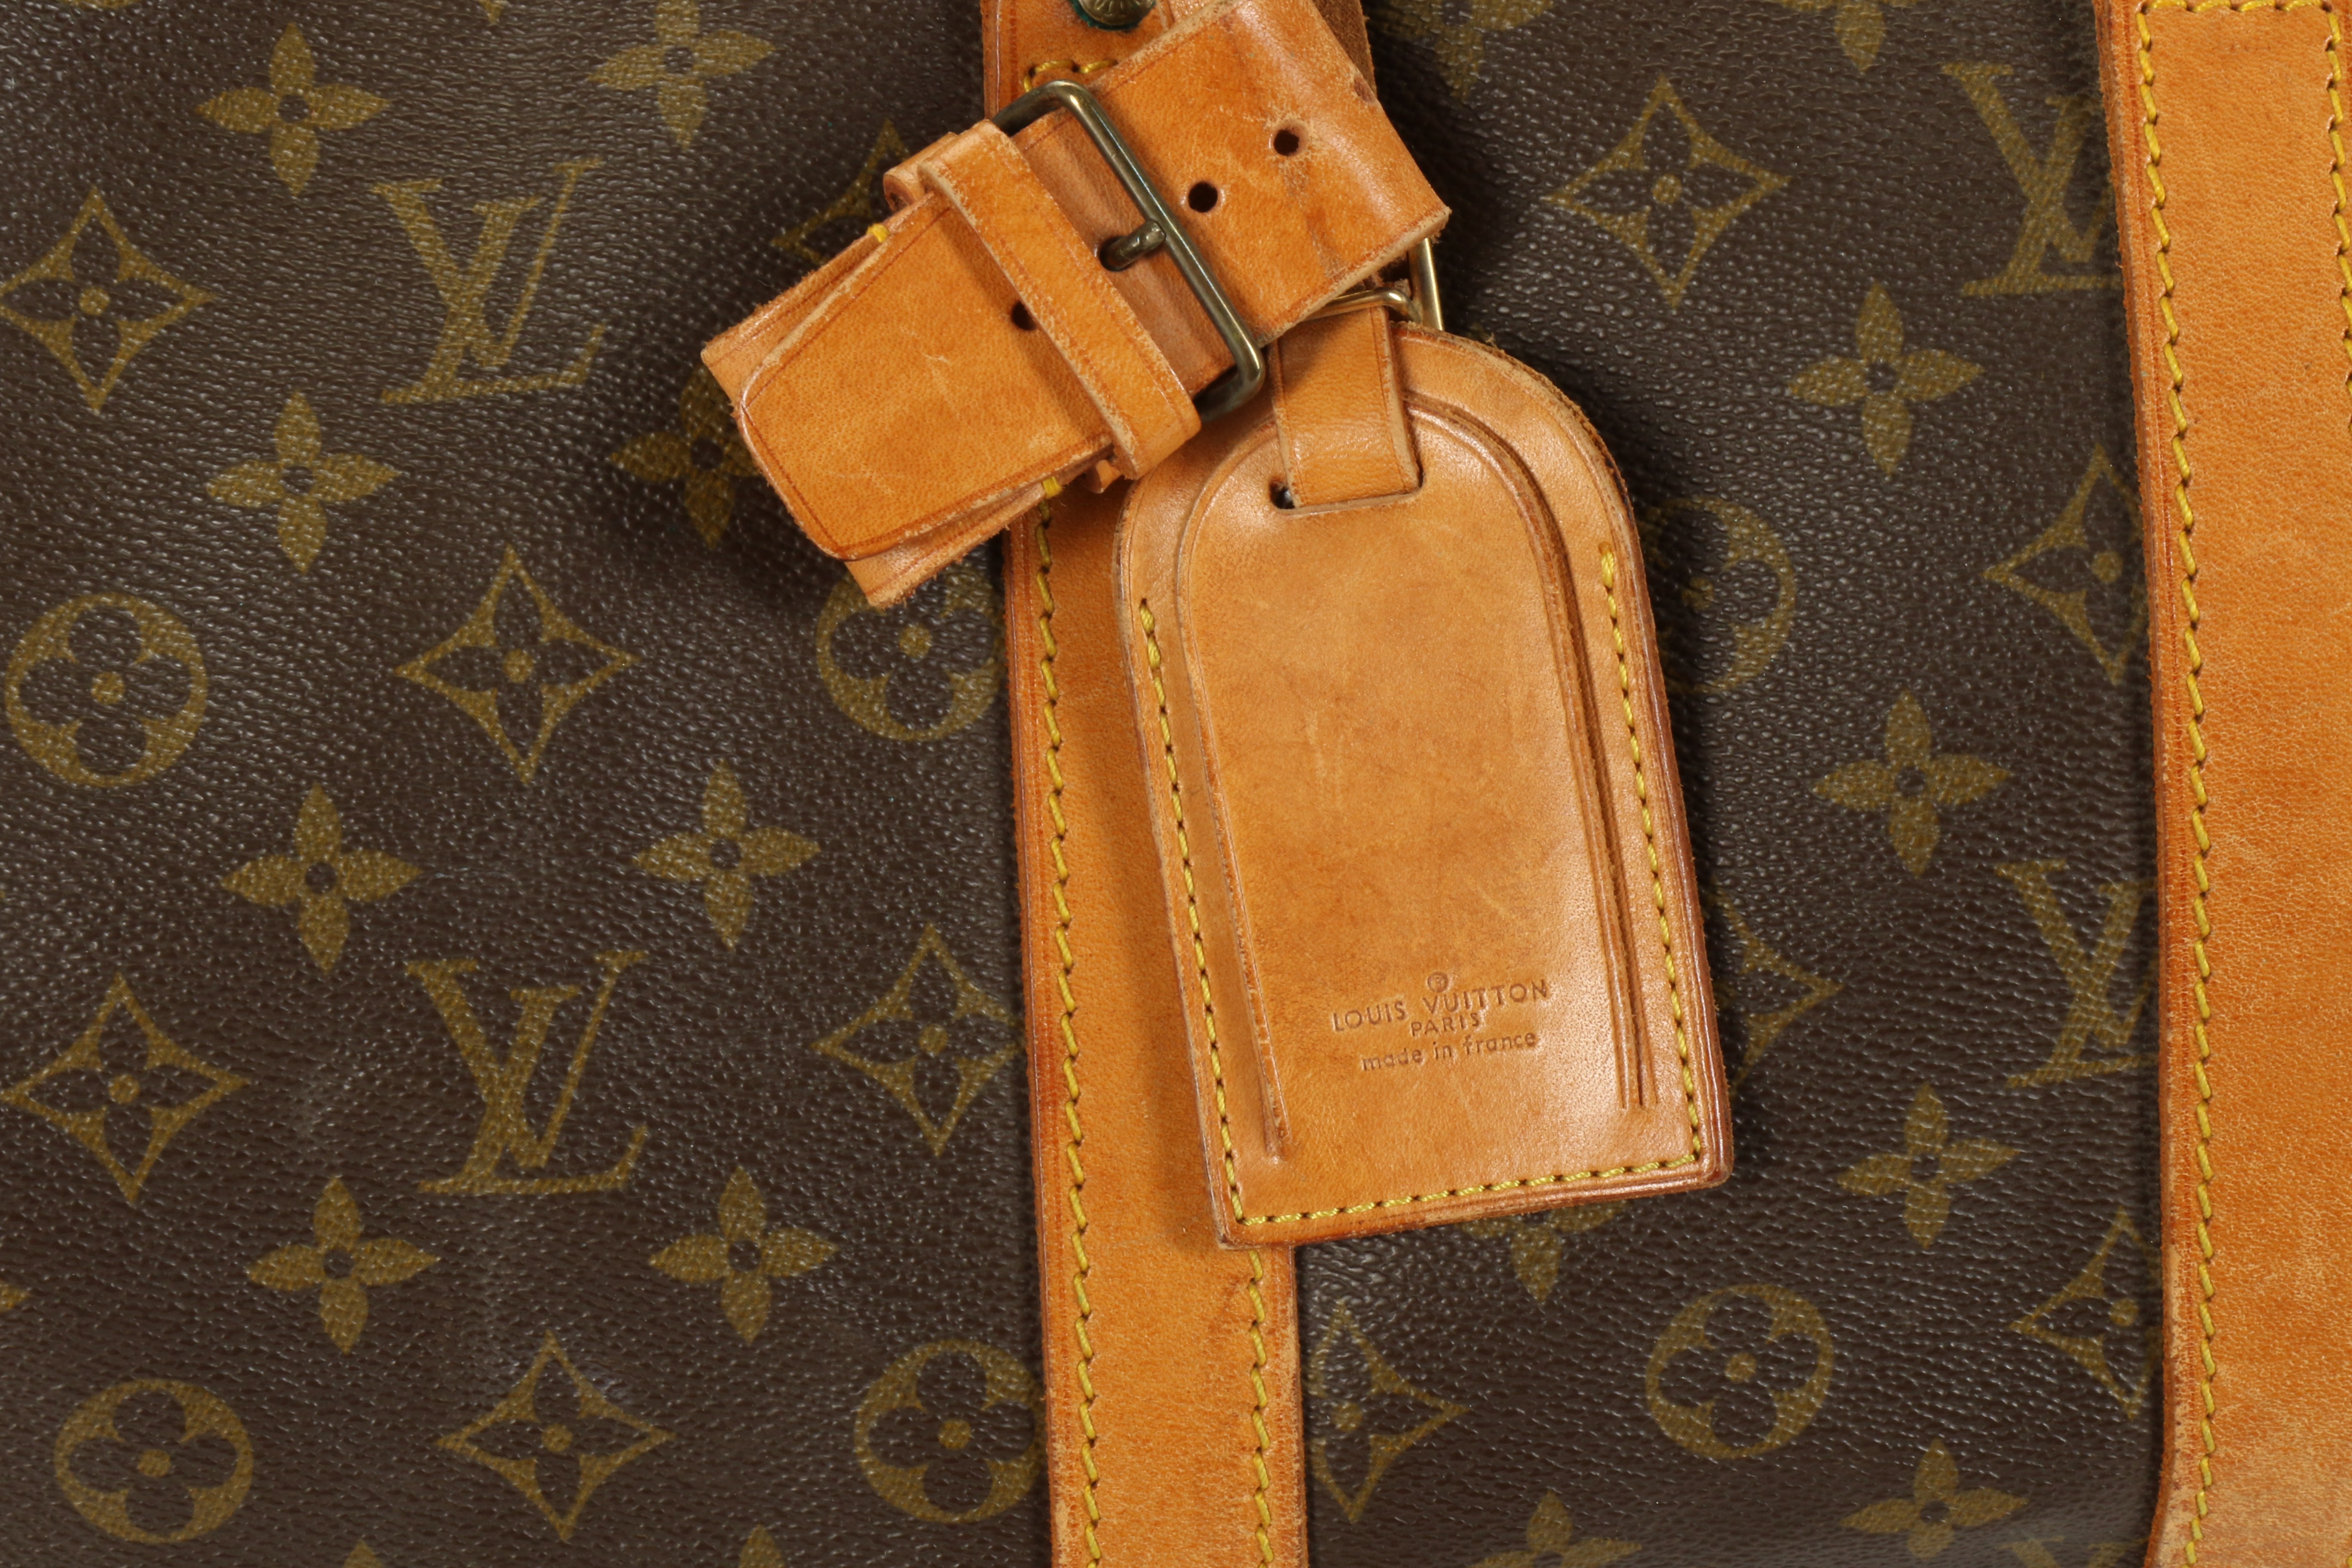 Louis Vuitton Keepall Bandouliere 45, c. 1984 (date code is faint), monogram canvas with leather - Image 2 of 6